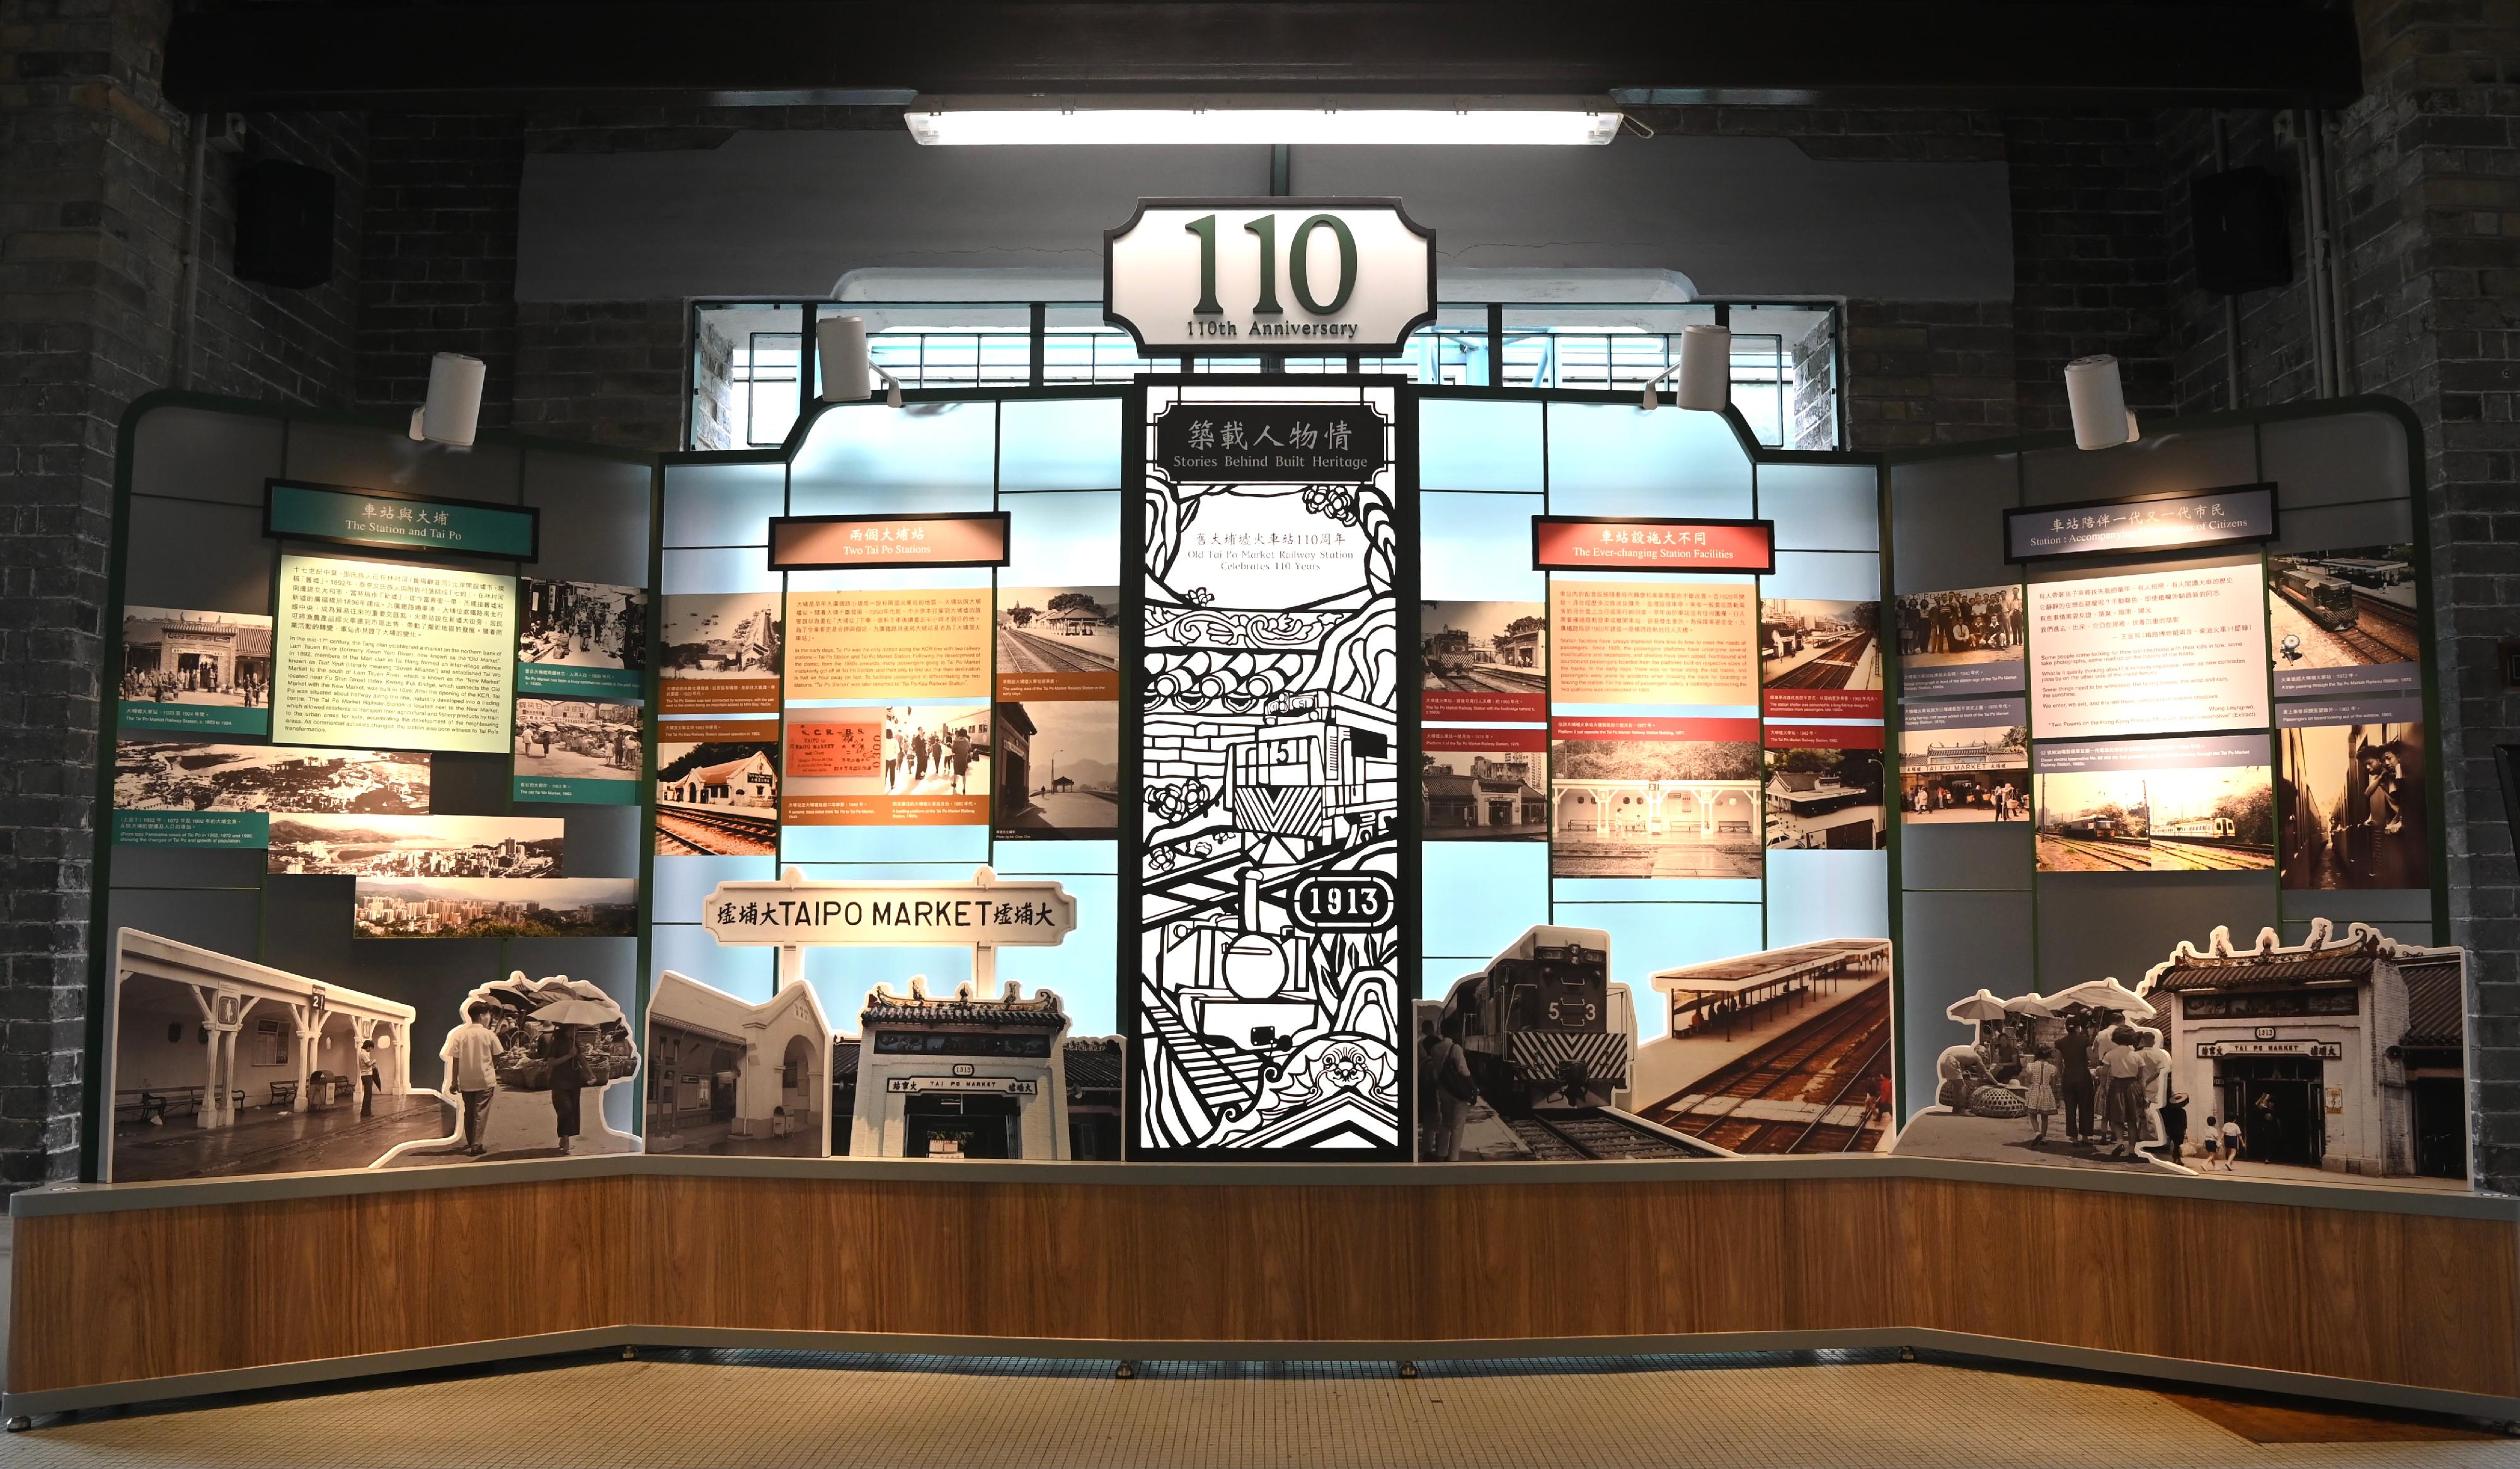 The "Stories Behind Built Heritage: Old Tai Po Market Railway Station Celebrates 110 Years" exhibition is now on display at the Hong Kong Railway Museum. 